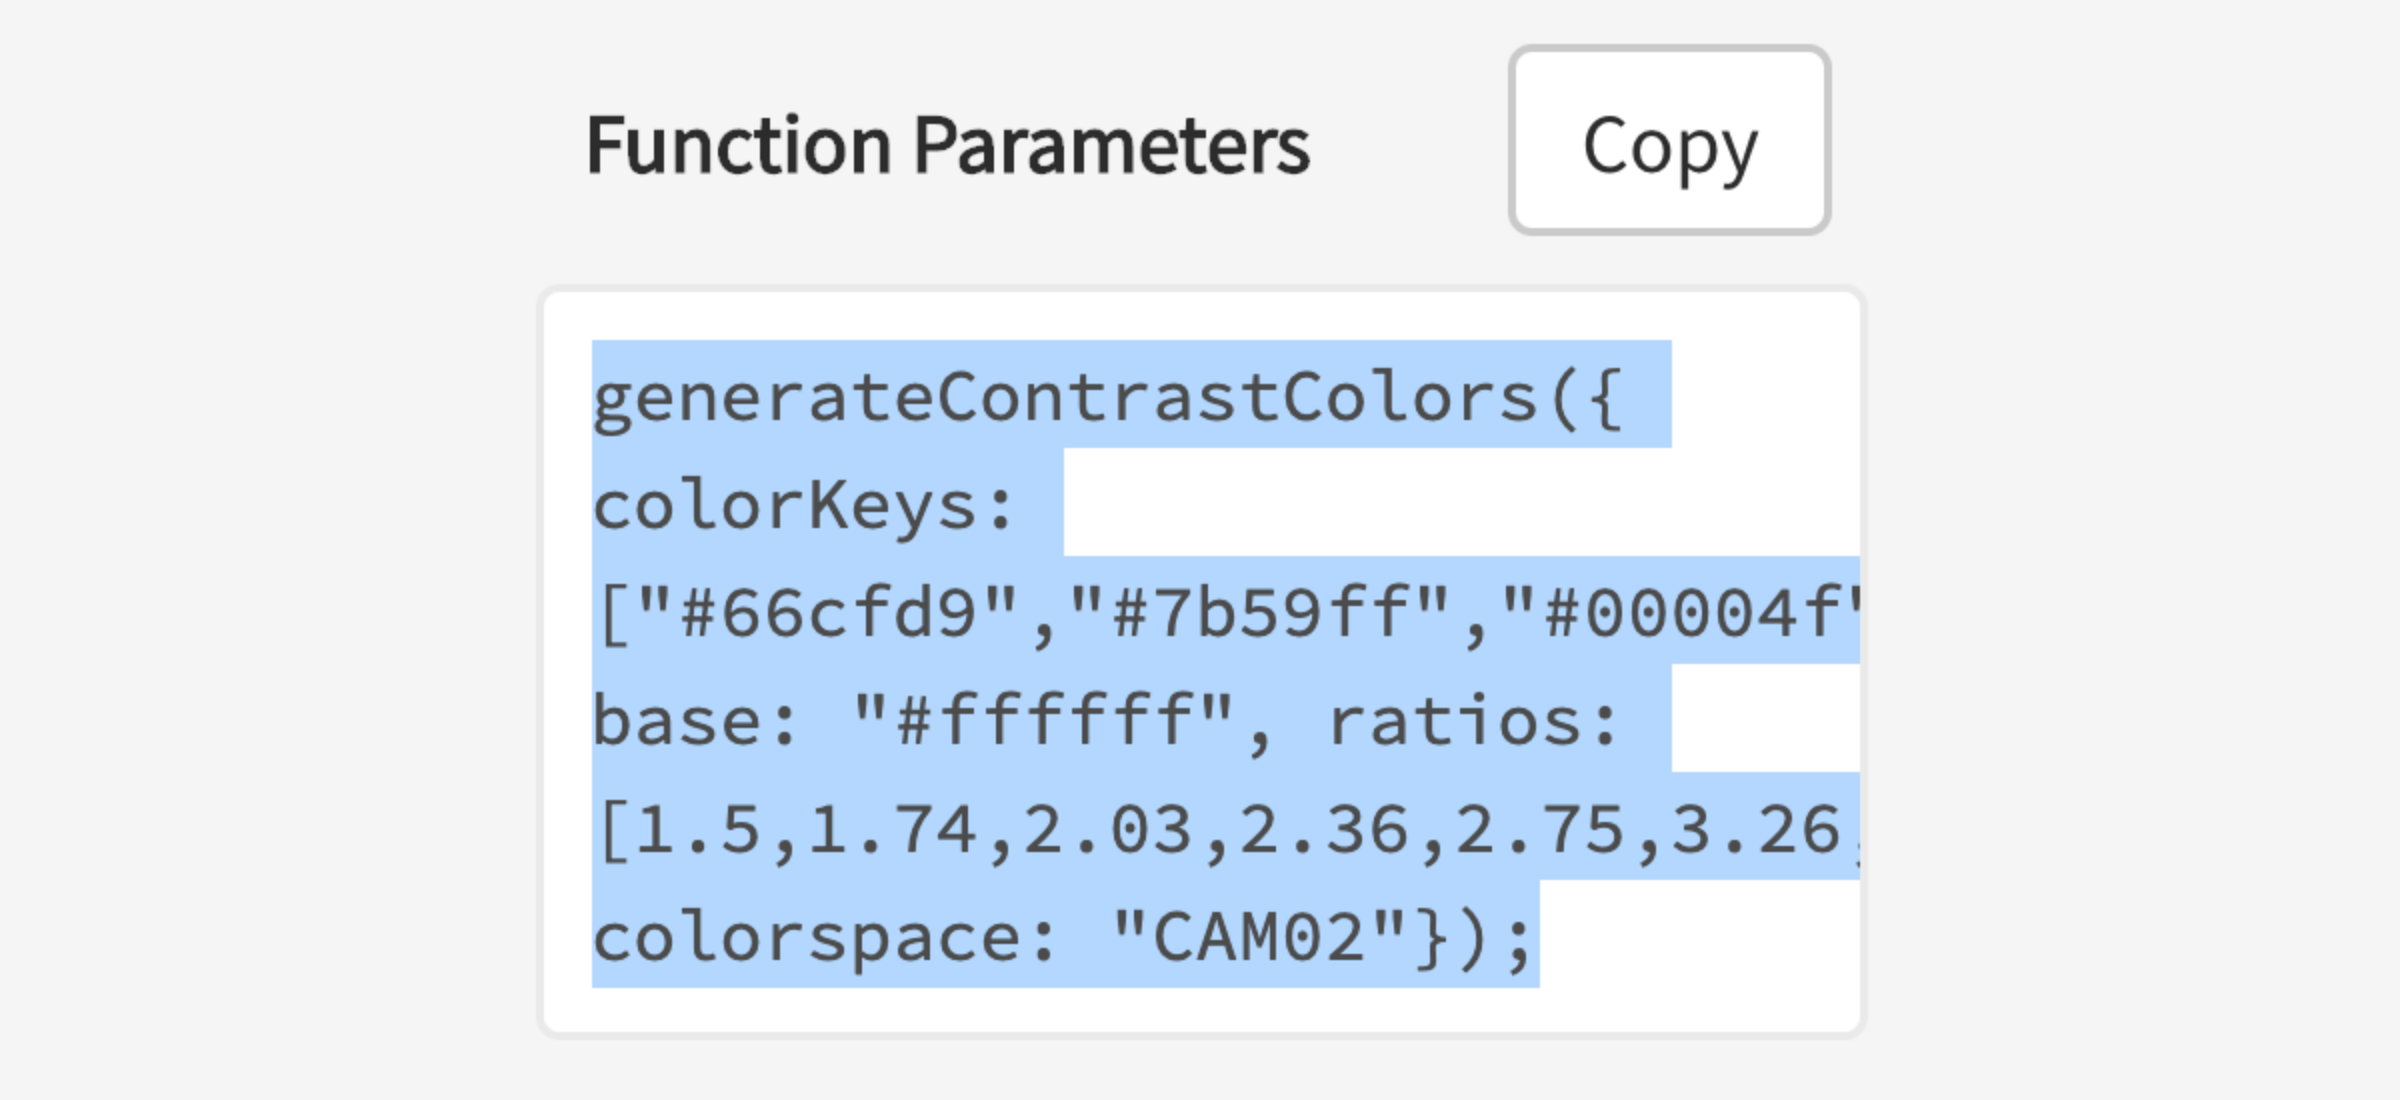 Output of function parameters for Leonardo javascript module highlighted. Copy button displayed above the output.